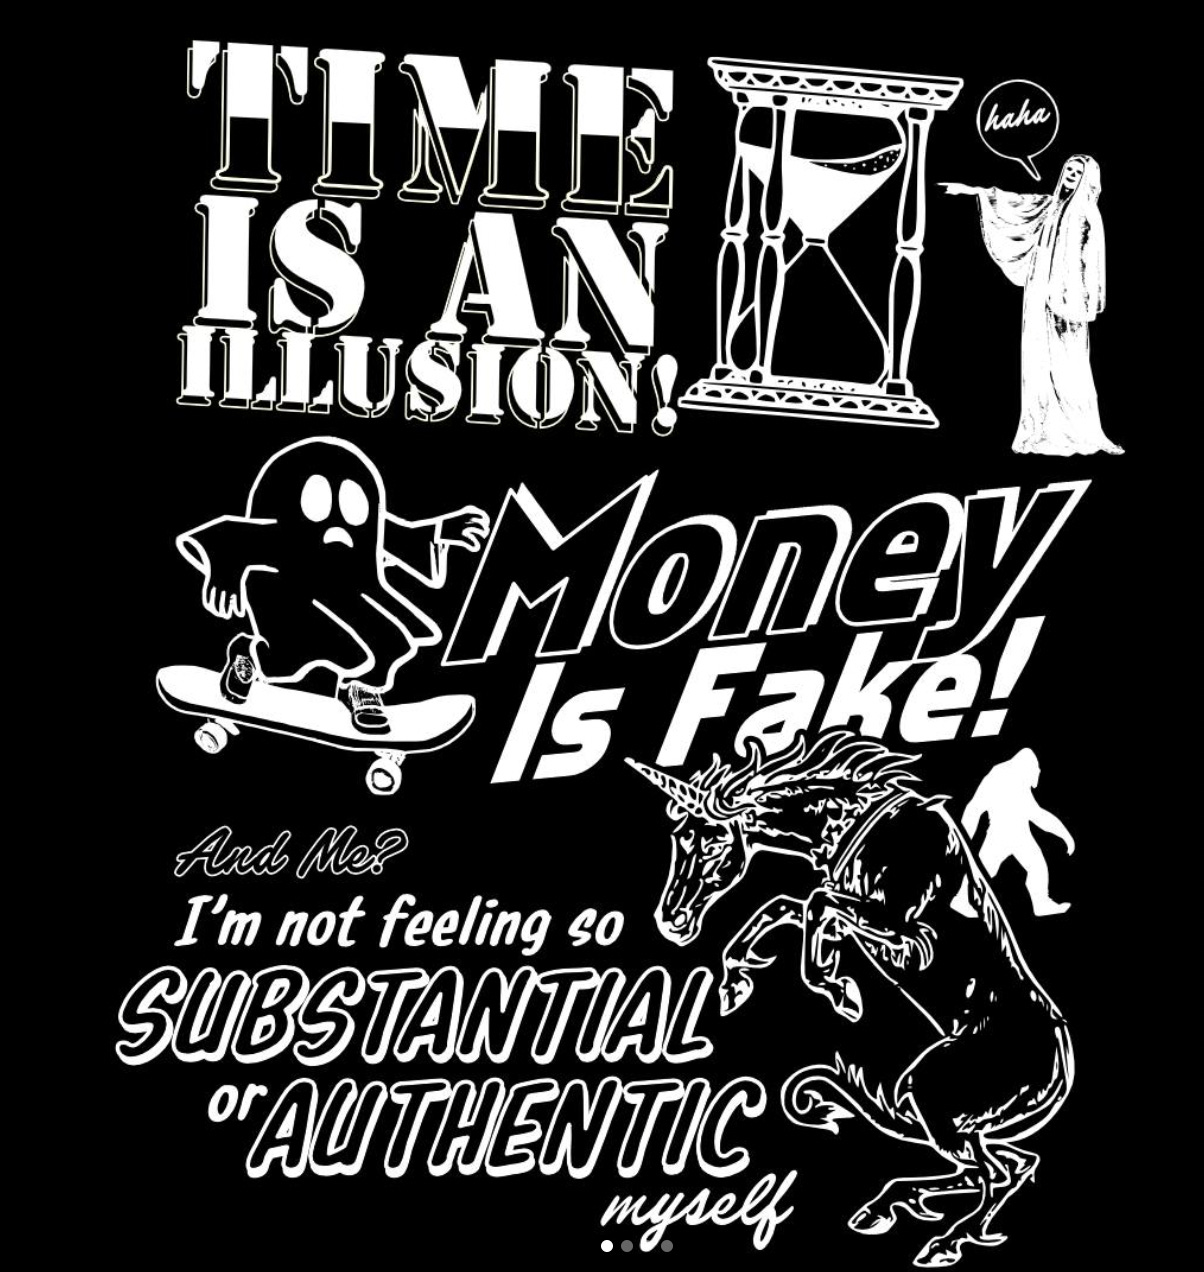 white letters on black background read: time is an illusion! money is fake! And me? I'm not feeling so substantial or authentic myself."